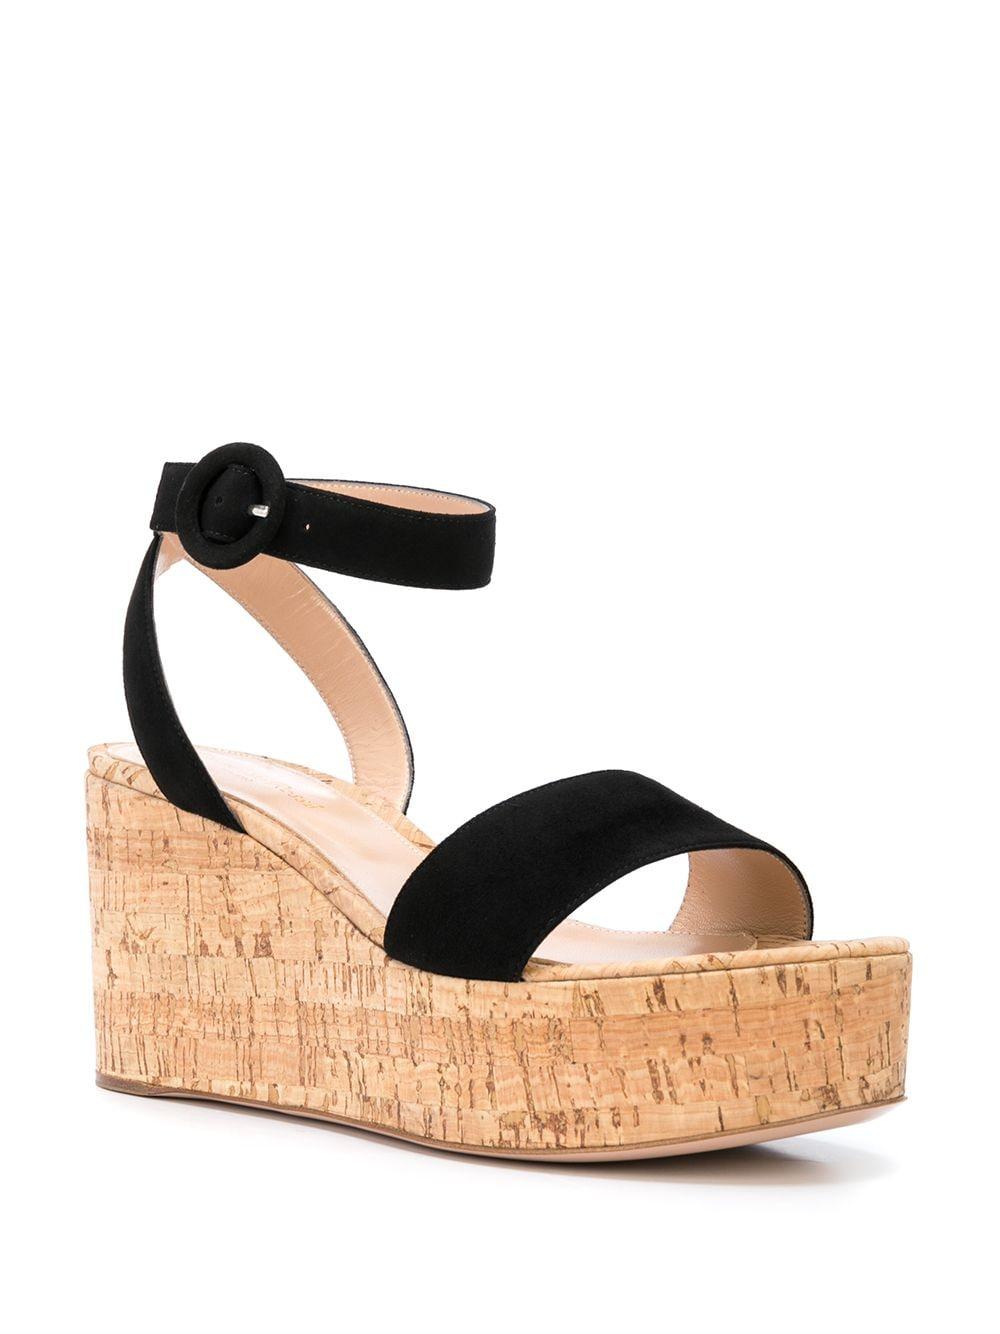 Gianvito Rossi Leather Open-toe Wedge Sandals in Black - Lyst